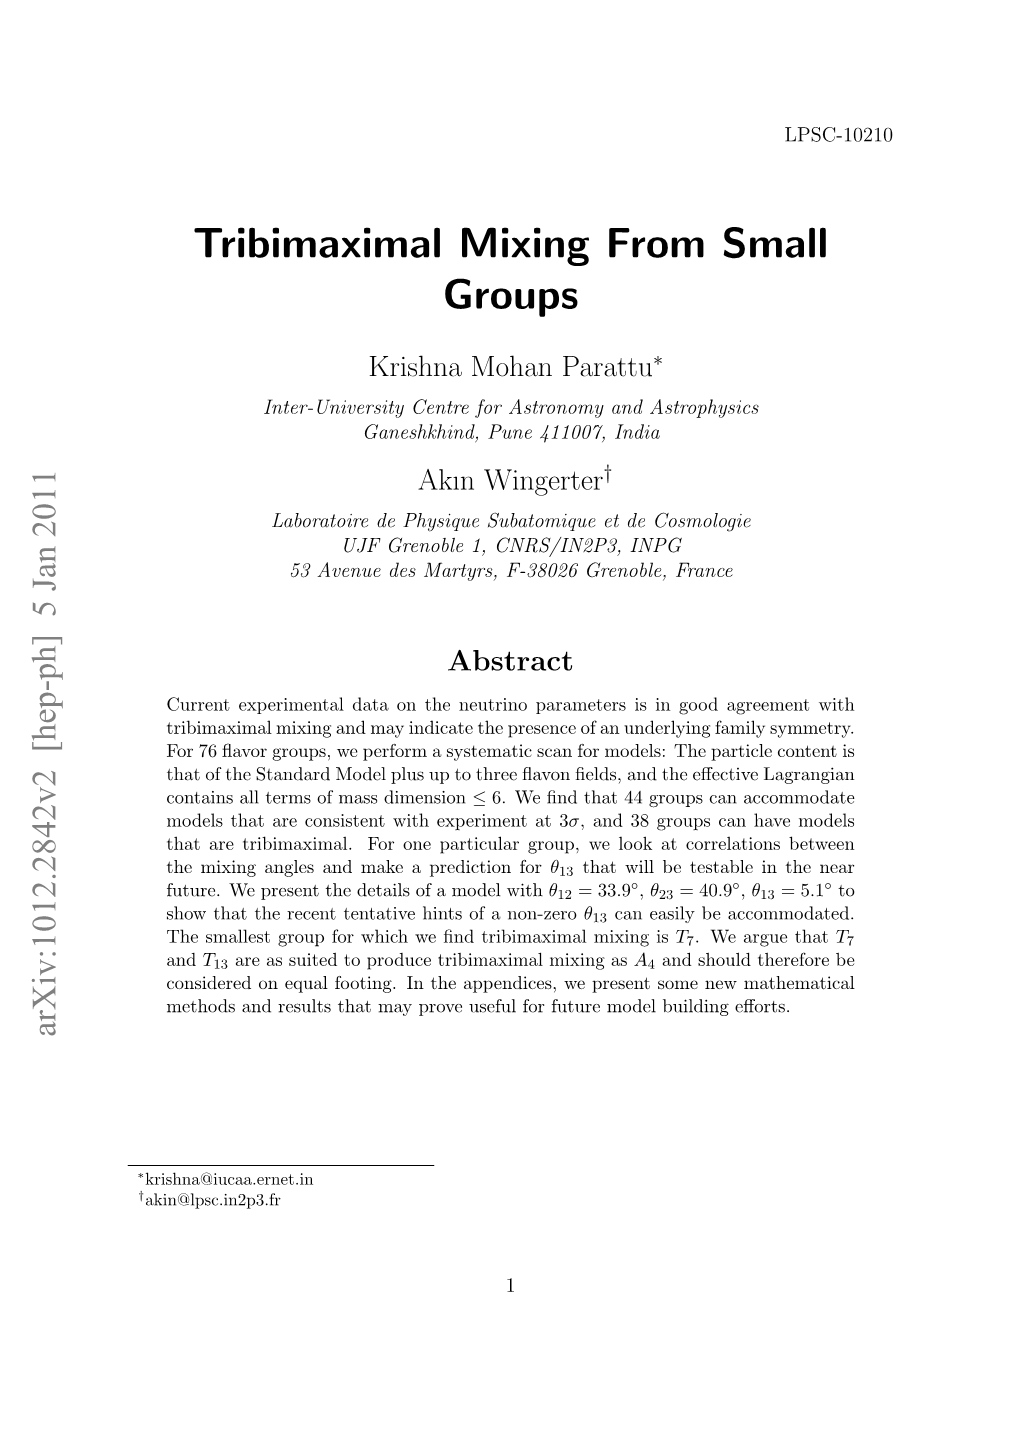 Tribimaximal Mixing from Small Groups